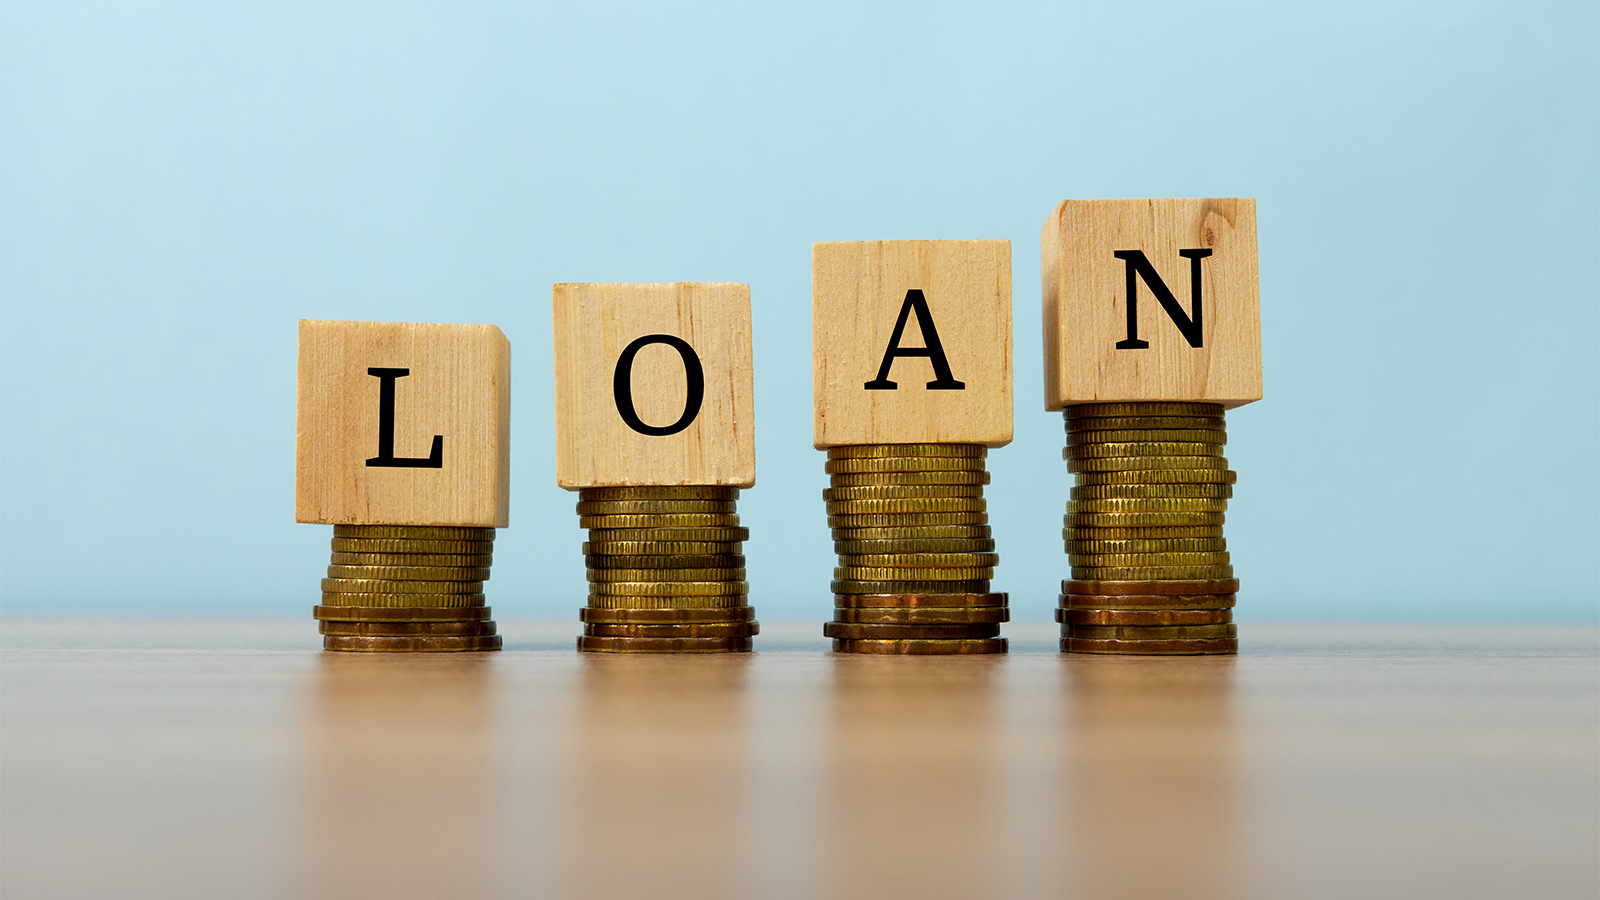 Types Of Loans